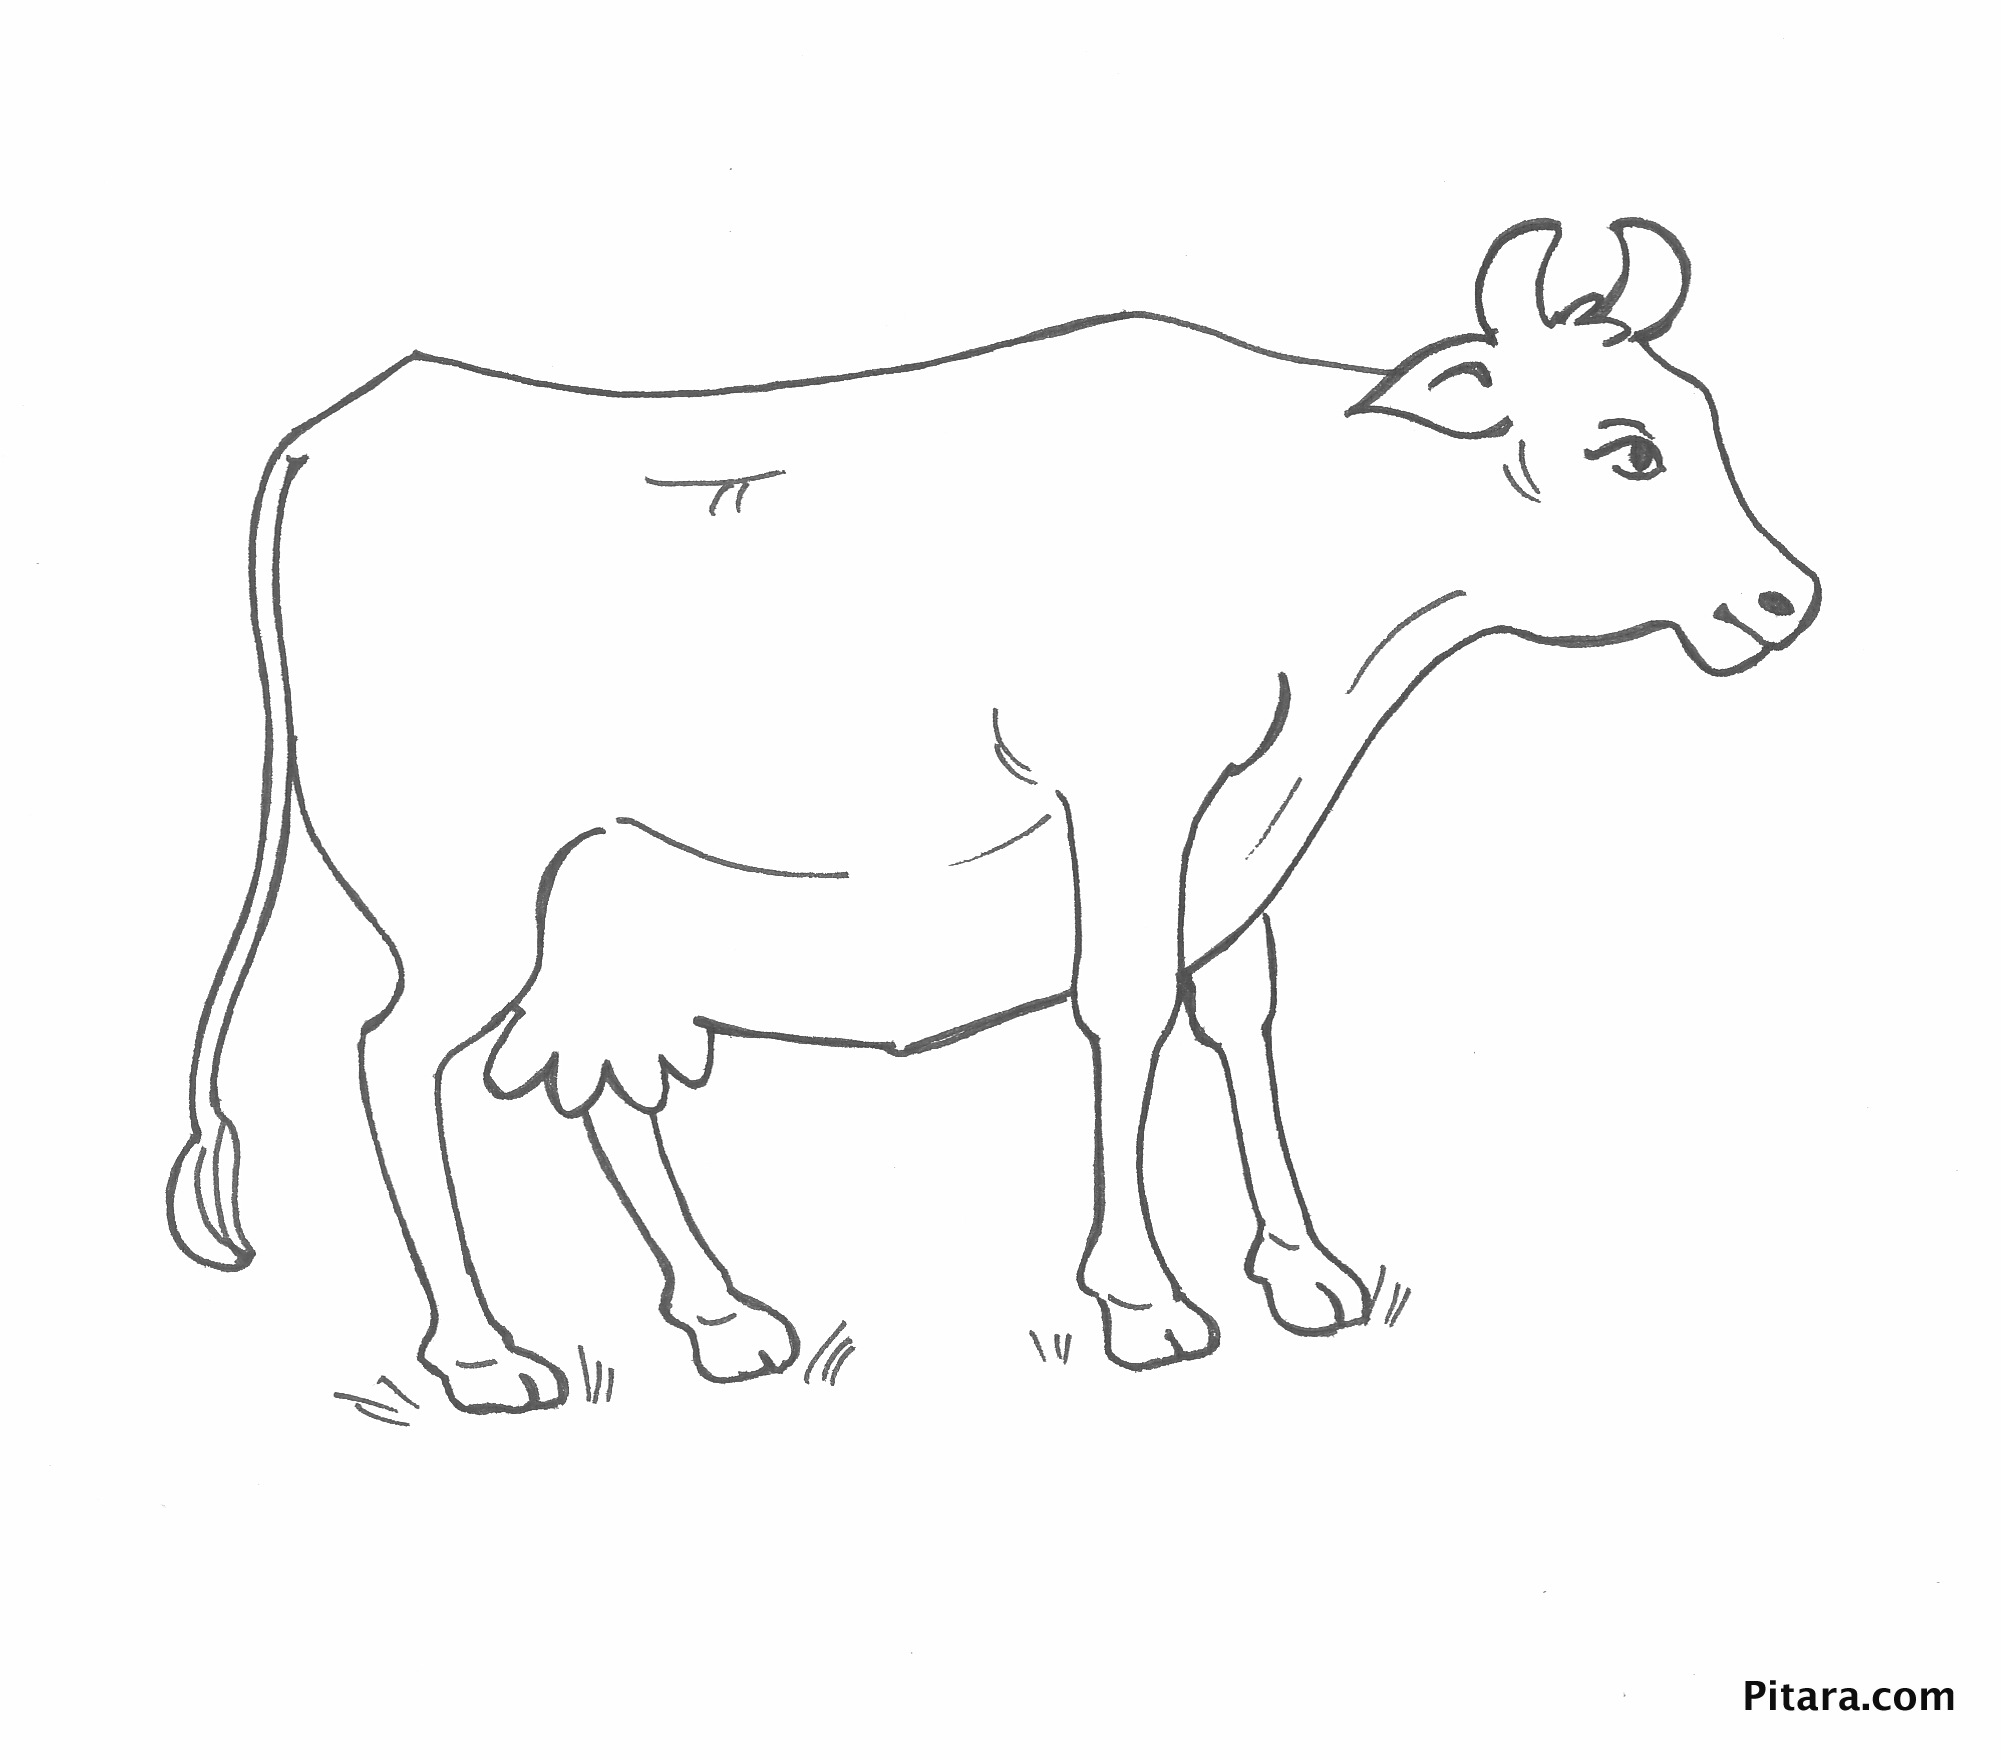 224 Animal Domestic Animals Coloring Pages with disney character